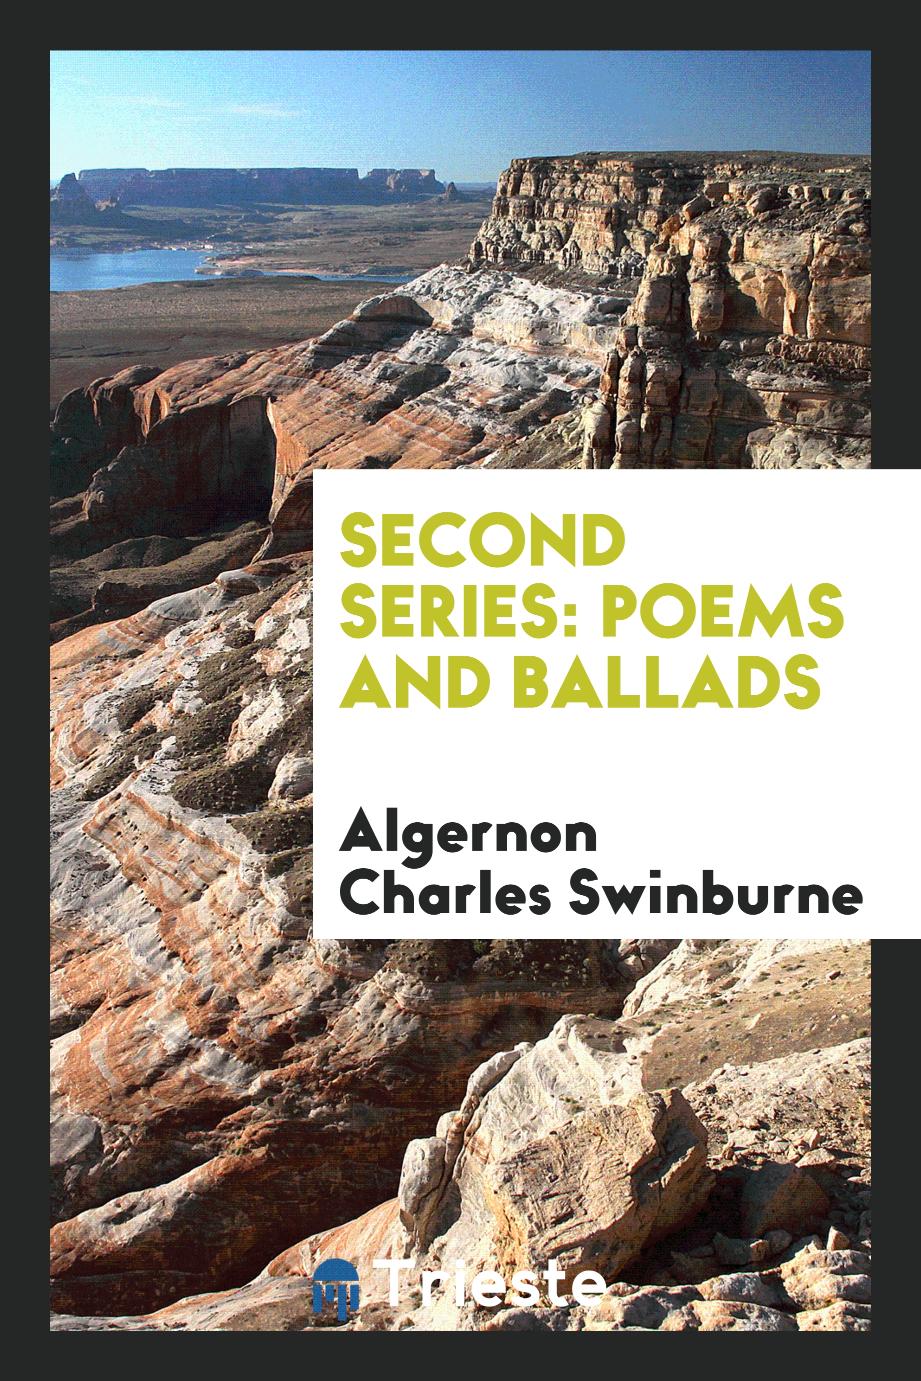 Second Series: Poems and Ballads